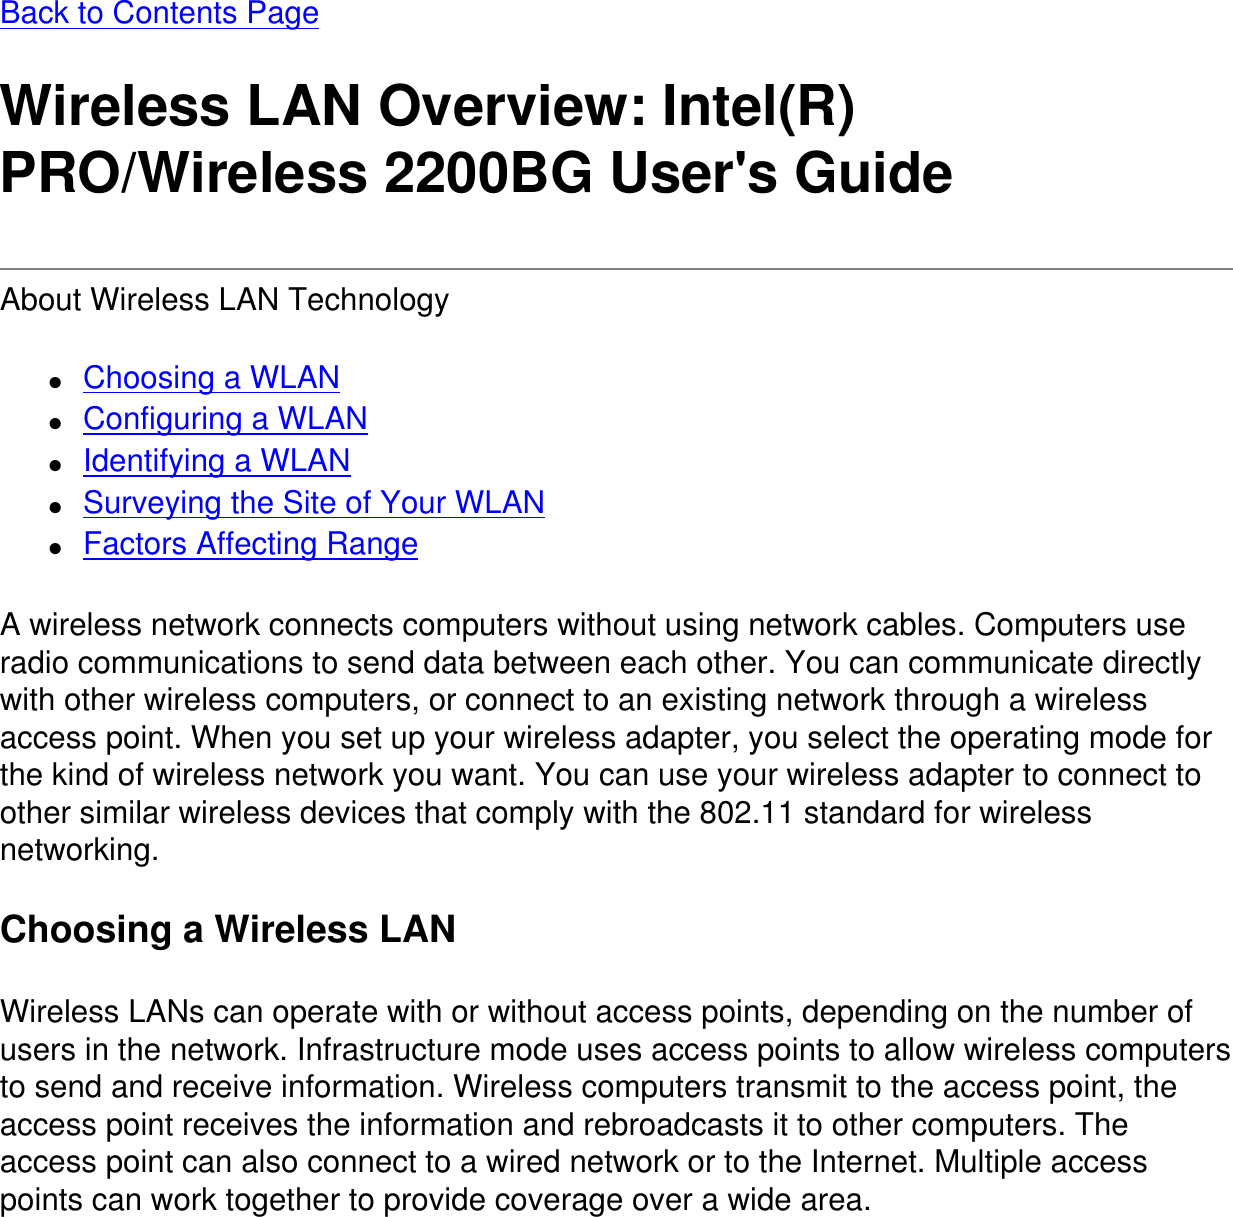 Back to Contents Page Wireless LAN Overview: Intel(R) PRO/Wireless 2200BG User&apos;s GuideAbout Wireless LAN Technology ●     Choosing a WLAN●     Configuring a WLAN●     Identifying a WLAN●     Surveying the Site of Your WLAN●     Factors Affecting RangeA wireless network connects computers without using network cables. Computers use radio communications to send data between each other. You can communicate directly with other wireless computers, or connect to an existing network through a wireless access point. When you set up your wireless adapter, you select the operating mode for the kind of wireless network you want. You can use your wireless adapter to connect to other similar wireless devices that comply with the 802.11 standard for wireless networking.Choosing a Wireless LANWireless LANs can operate with or without access points, depending on the number of users in the network. Infrastructure mode uses access points to allow wireless computers to send and receive information. Wireless computers transmit to the access point, the access point receives the information and rebroadcasts it to other computers. The access point can also connect to a wired network or to the Internet. Multiple access points can work together to provide coverage over a wide area.